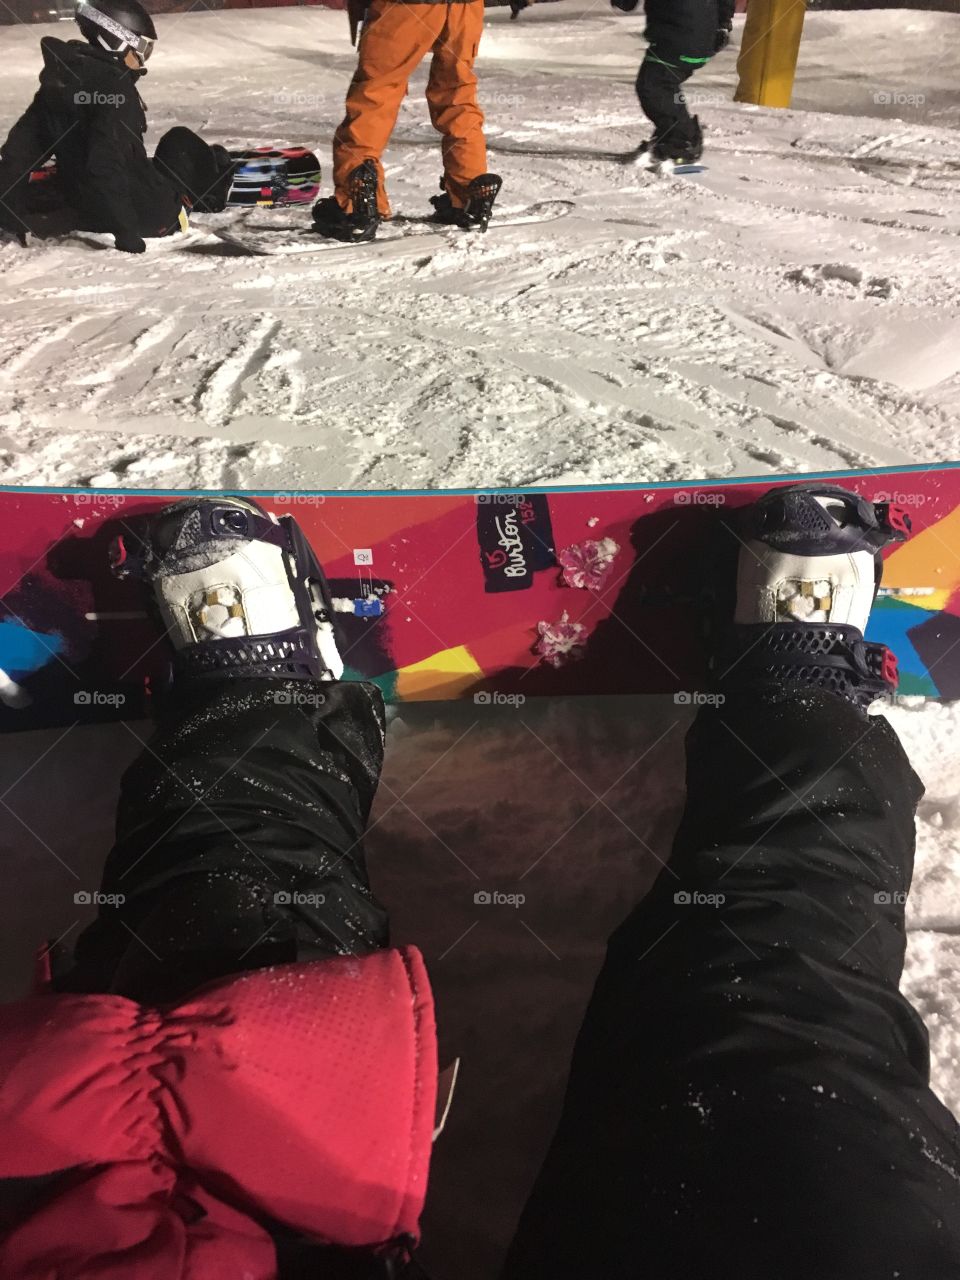 Night on the slopes: my view 